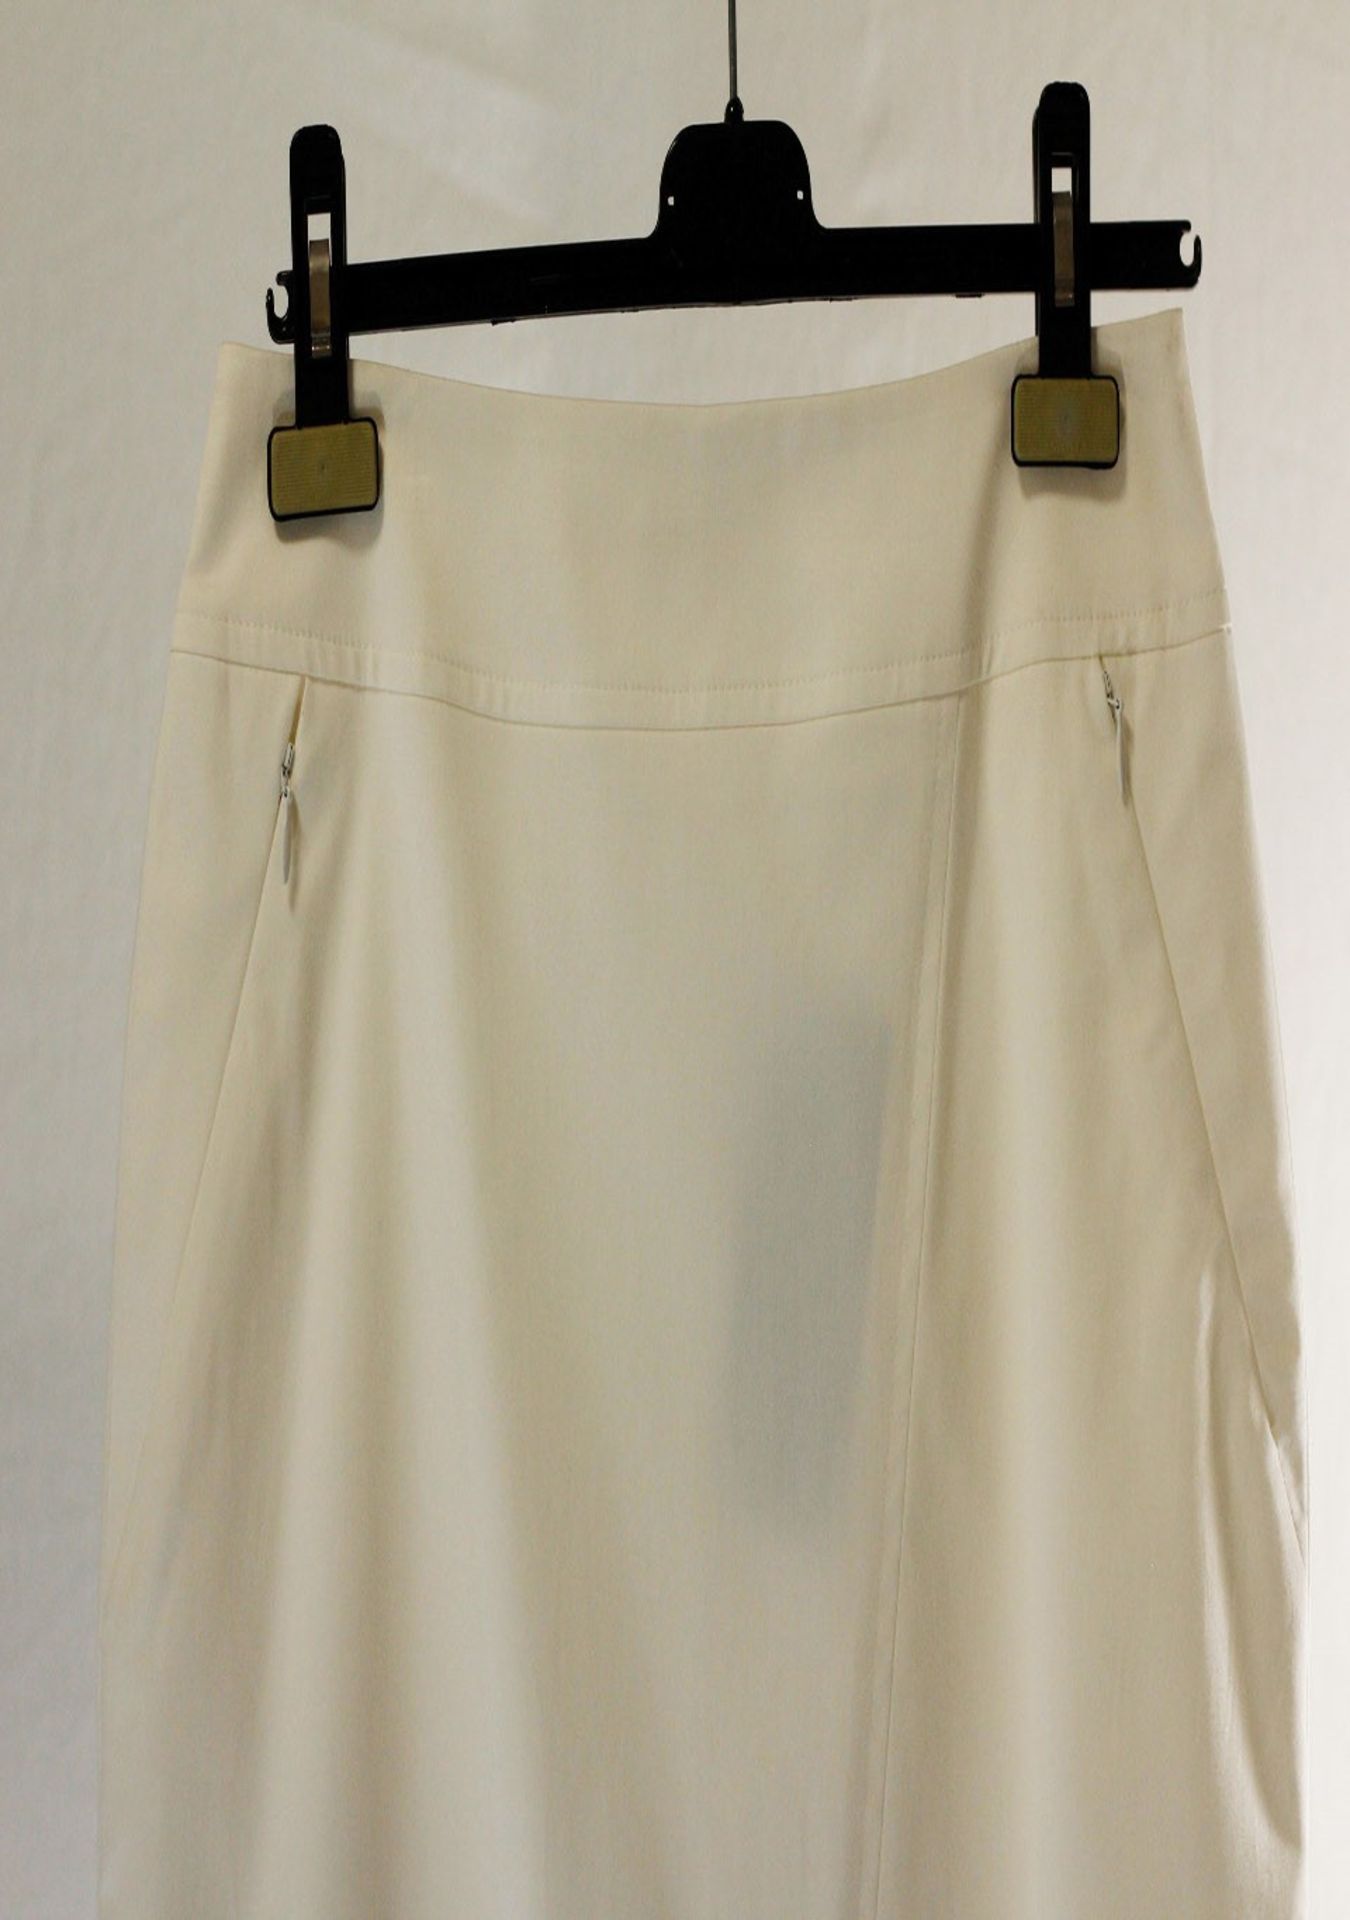 1 x Anne Belin White Skirt - Size: 14 - Material: 100% Cotton - From a High End Clothing Boutique In - Image 4 of 9